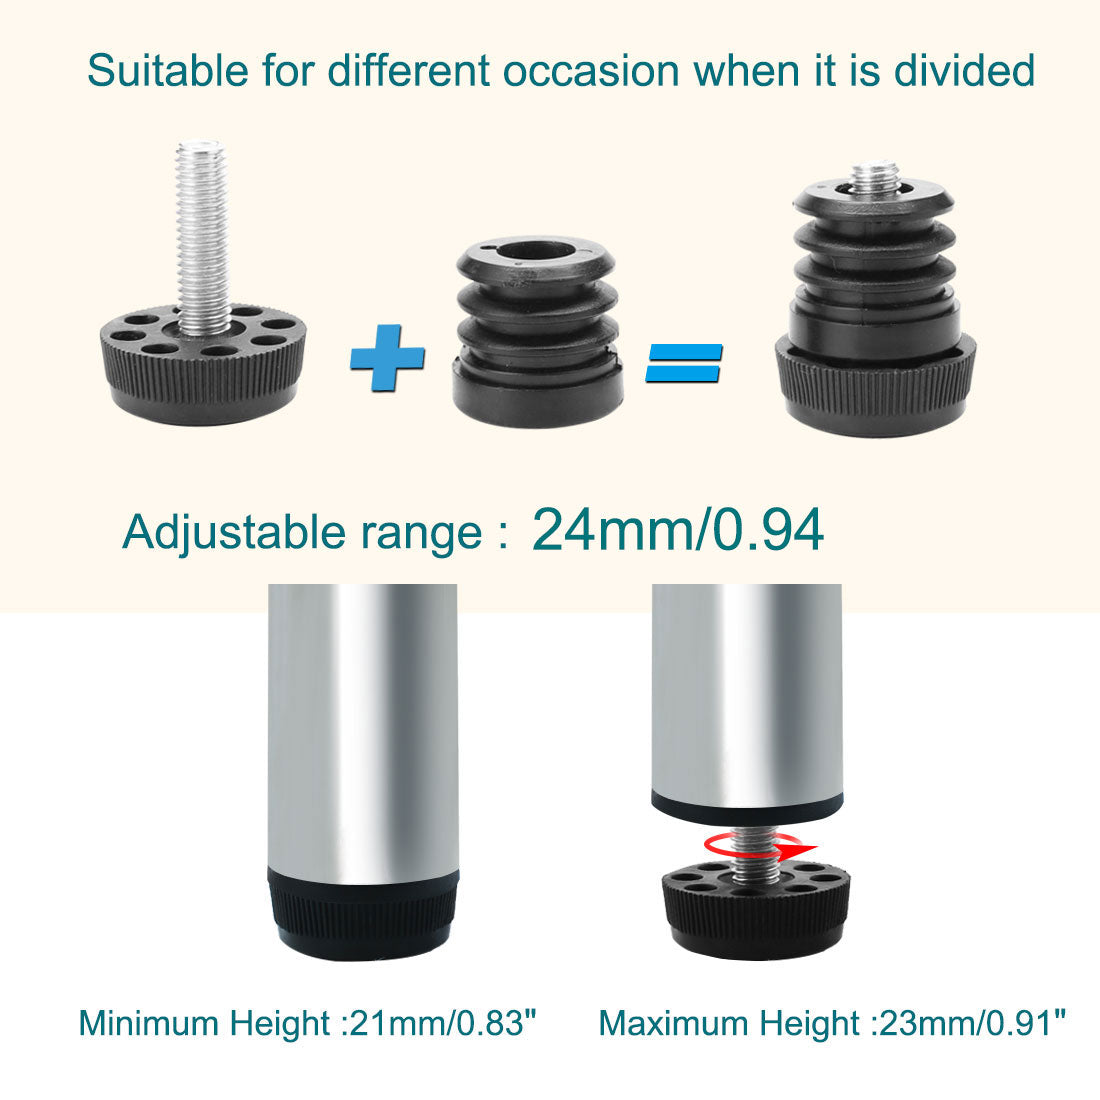 uxcell Uxcell Leveling Feet 1" 25mm OD Round Insert Furniture Adjustable Leveler 8 Sets